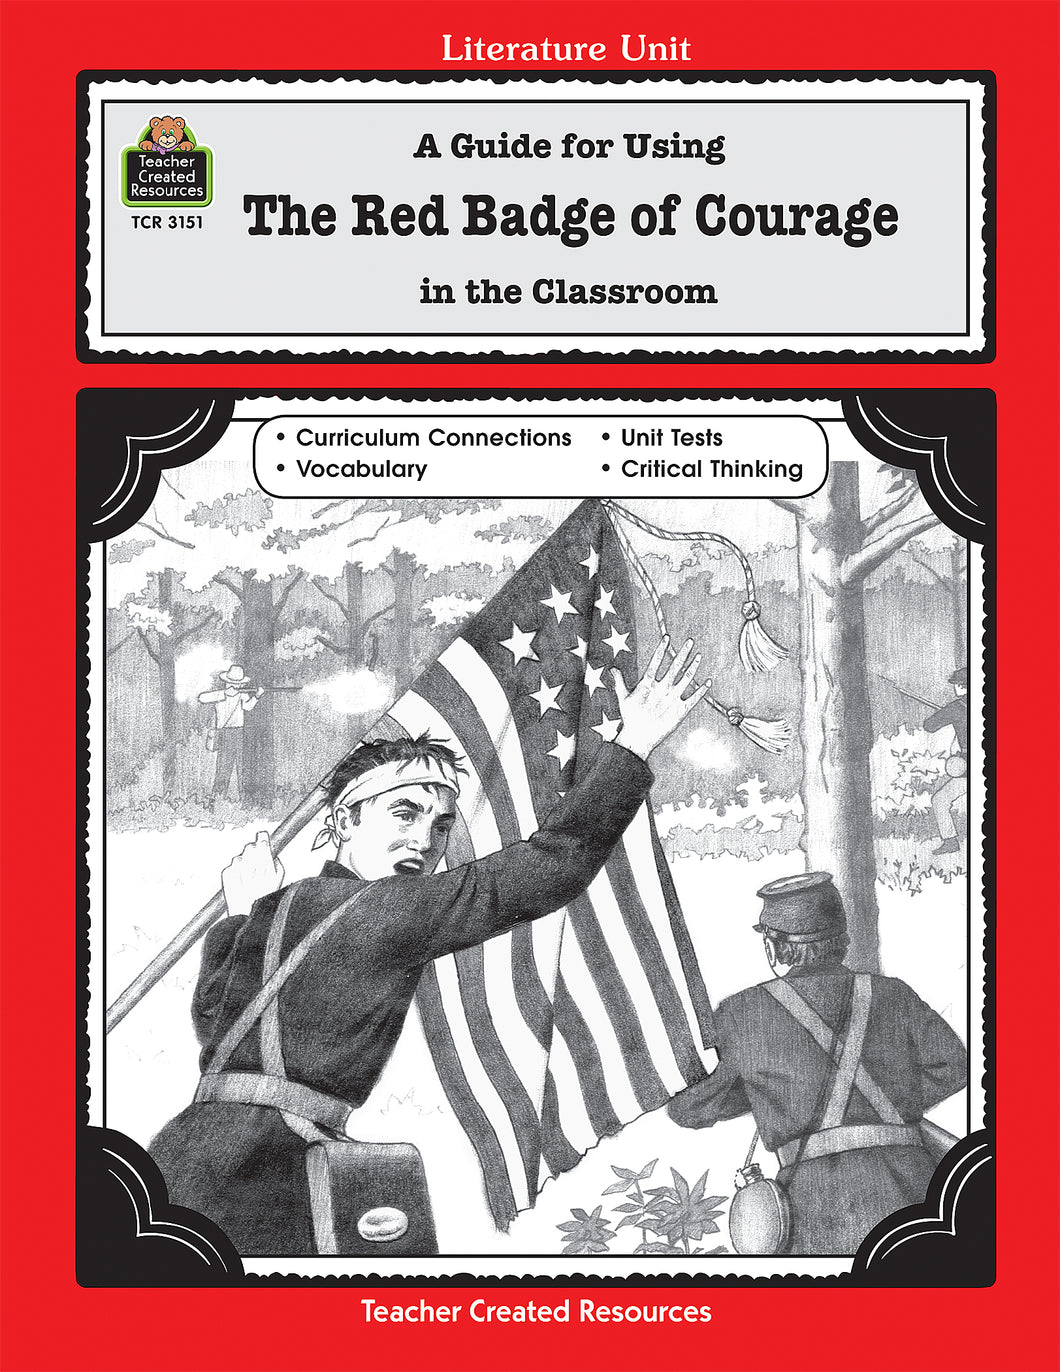 Literature Unit: A Guide for Using The Red Badge of Courage in the Classroom